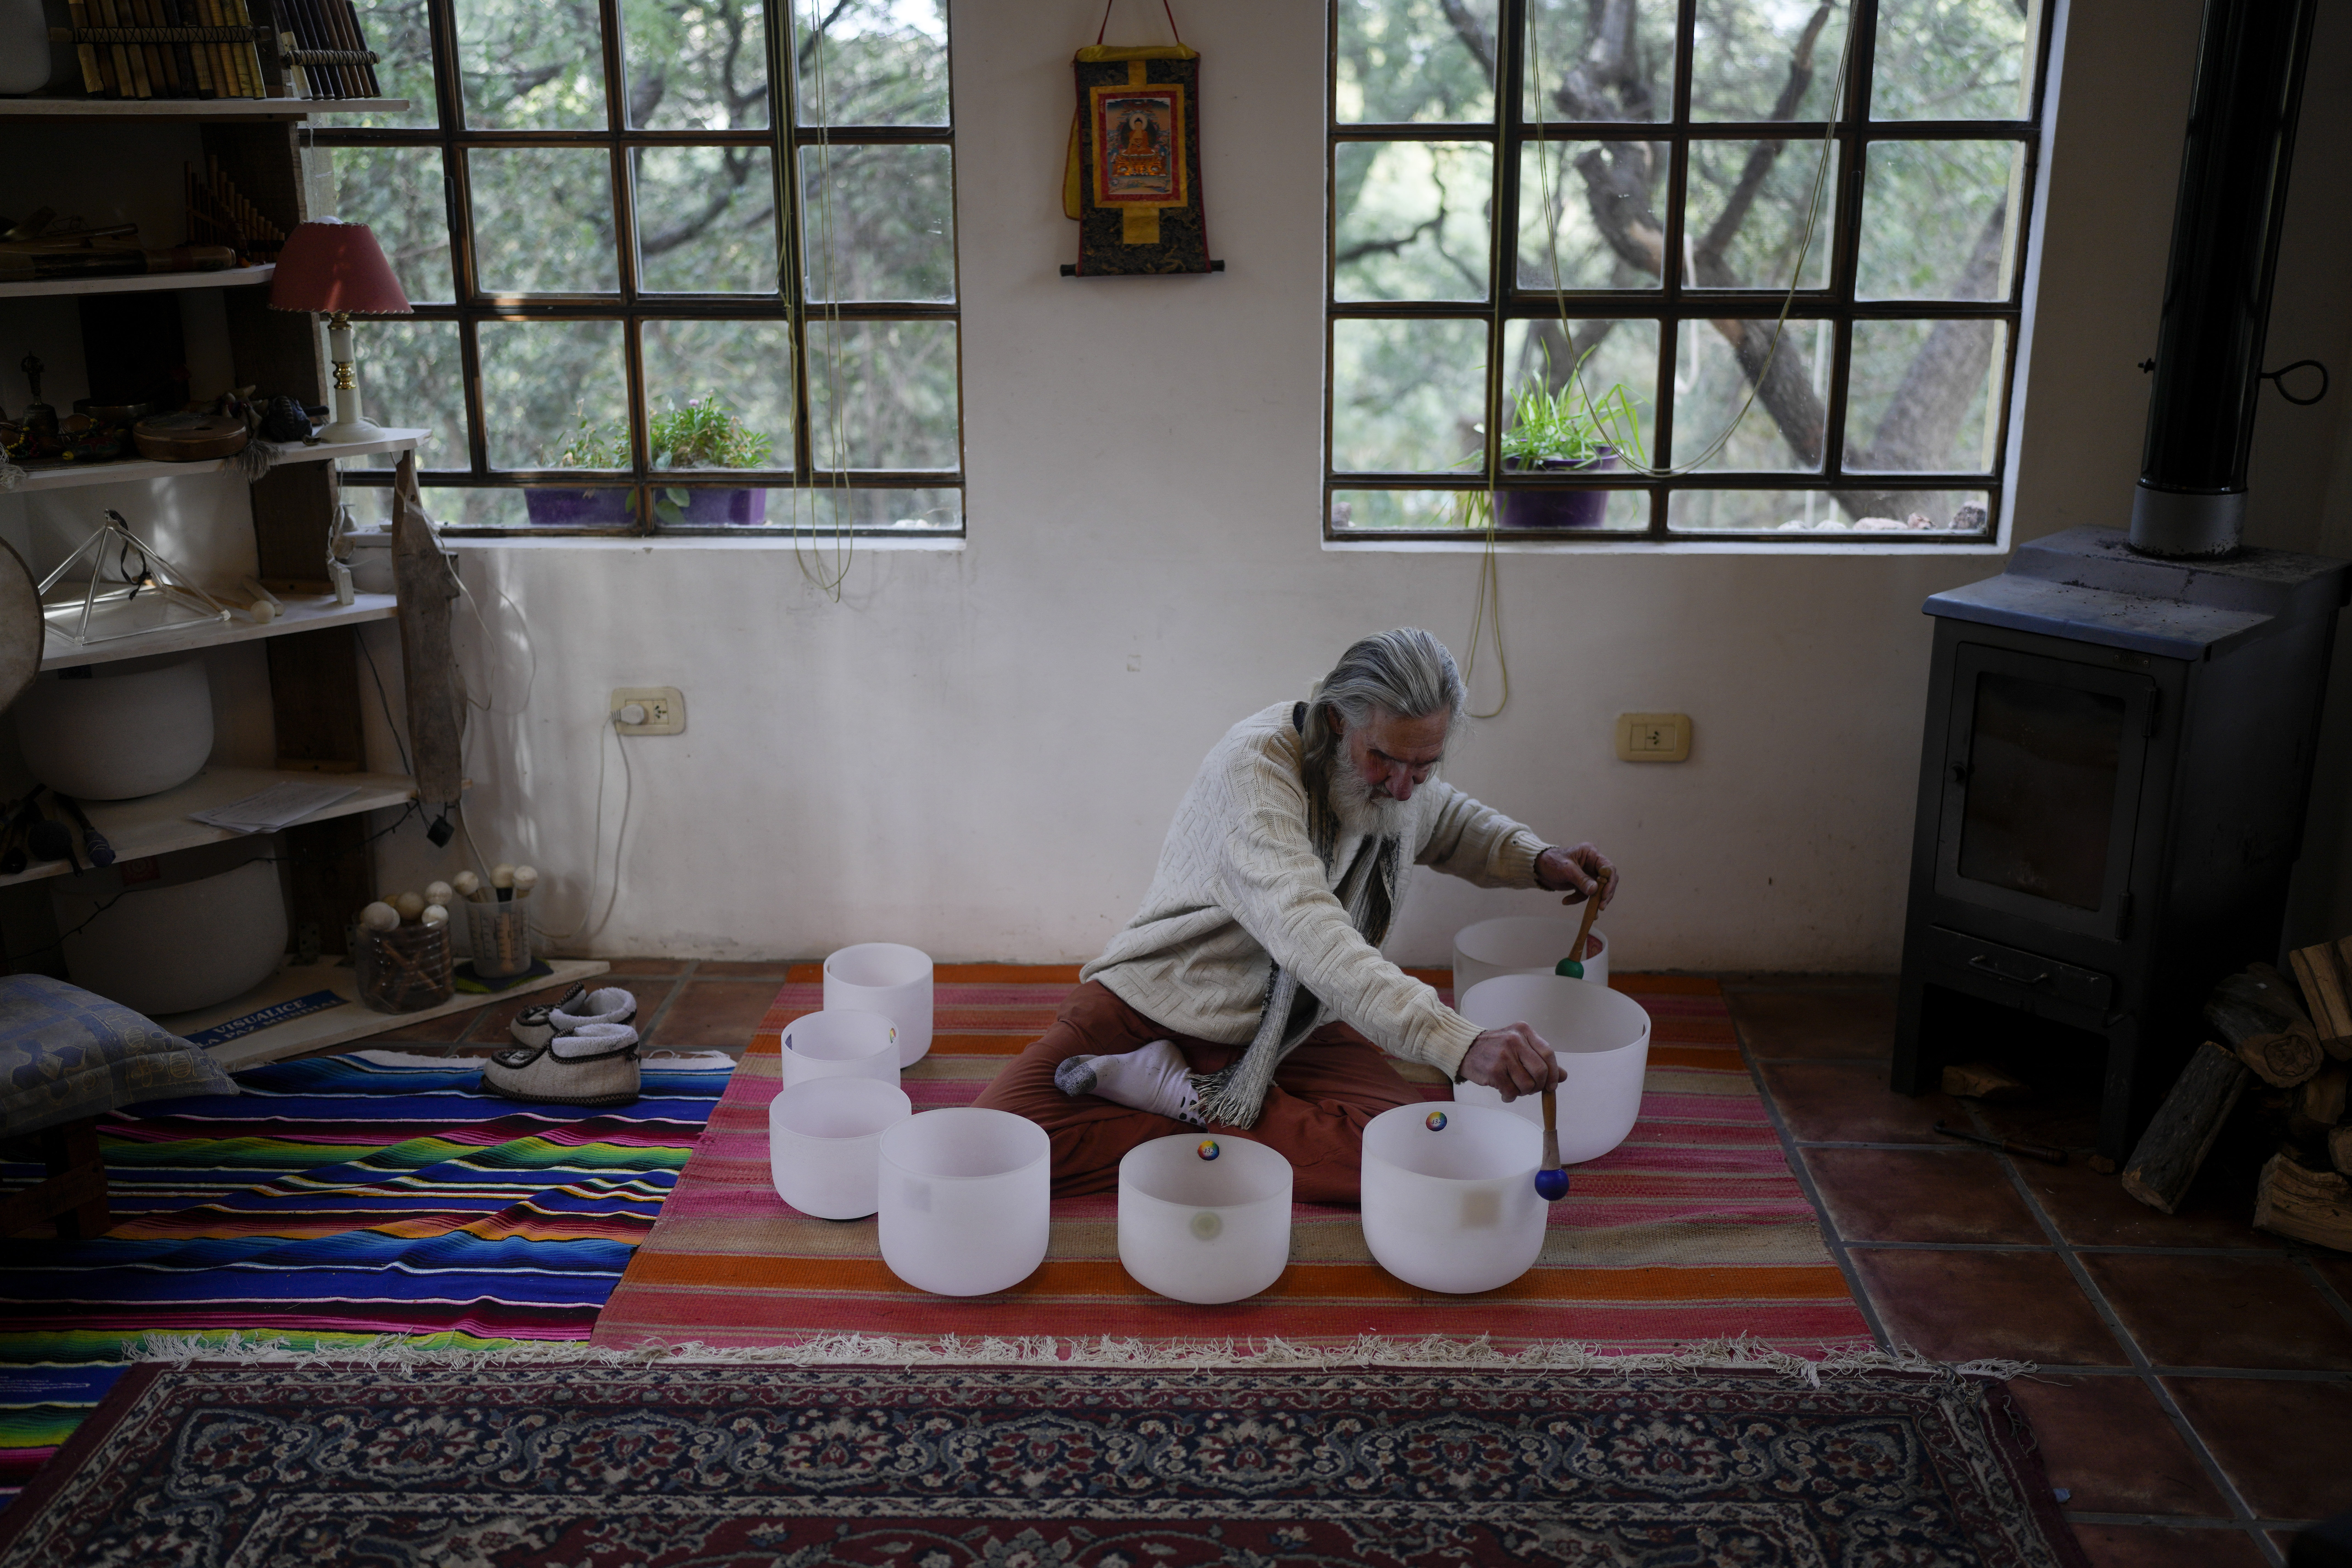 Daniel Brower plays crystal bowls at his home in Capilla del Monte, Cordoba, Argentina, July 18. Brower renounced his Christian upbringing and now looks for his spirituality through music and nature. (AP/Natacha Pisarenko)